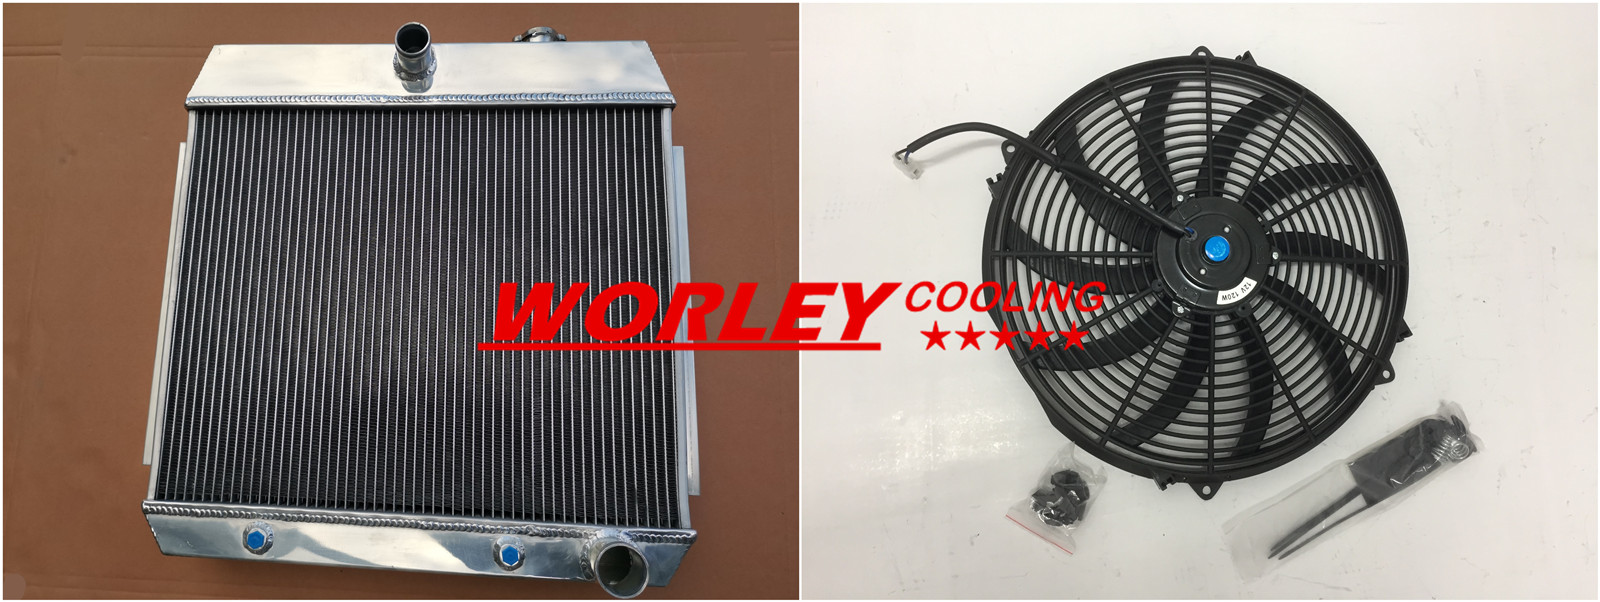 3 row for chevy bel air v8 w/cooler 1955 1956 1957アルミニウムラジエーター3ROW For CHEVY BEL AIR V8 W/COOLER 1955 1956 1957 Alumi